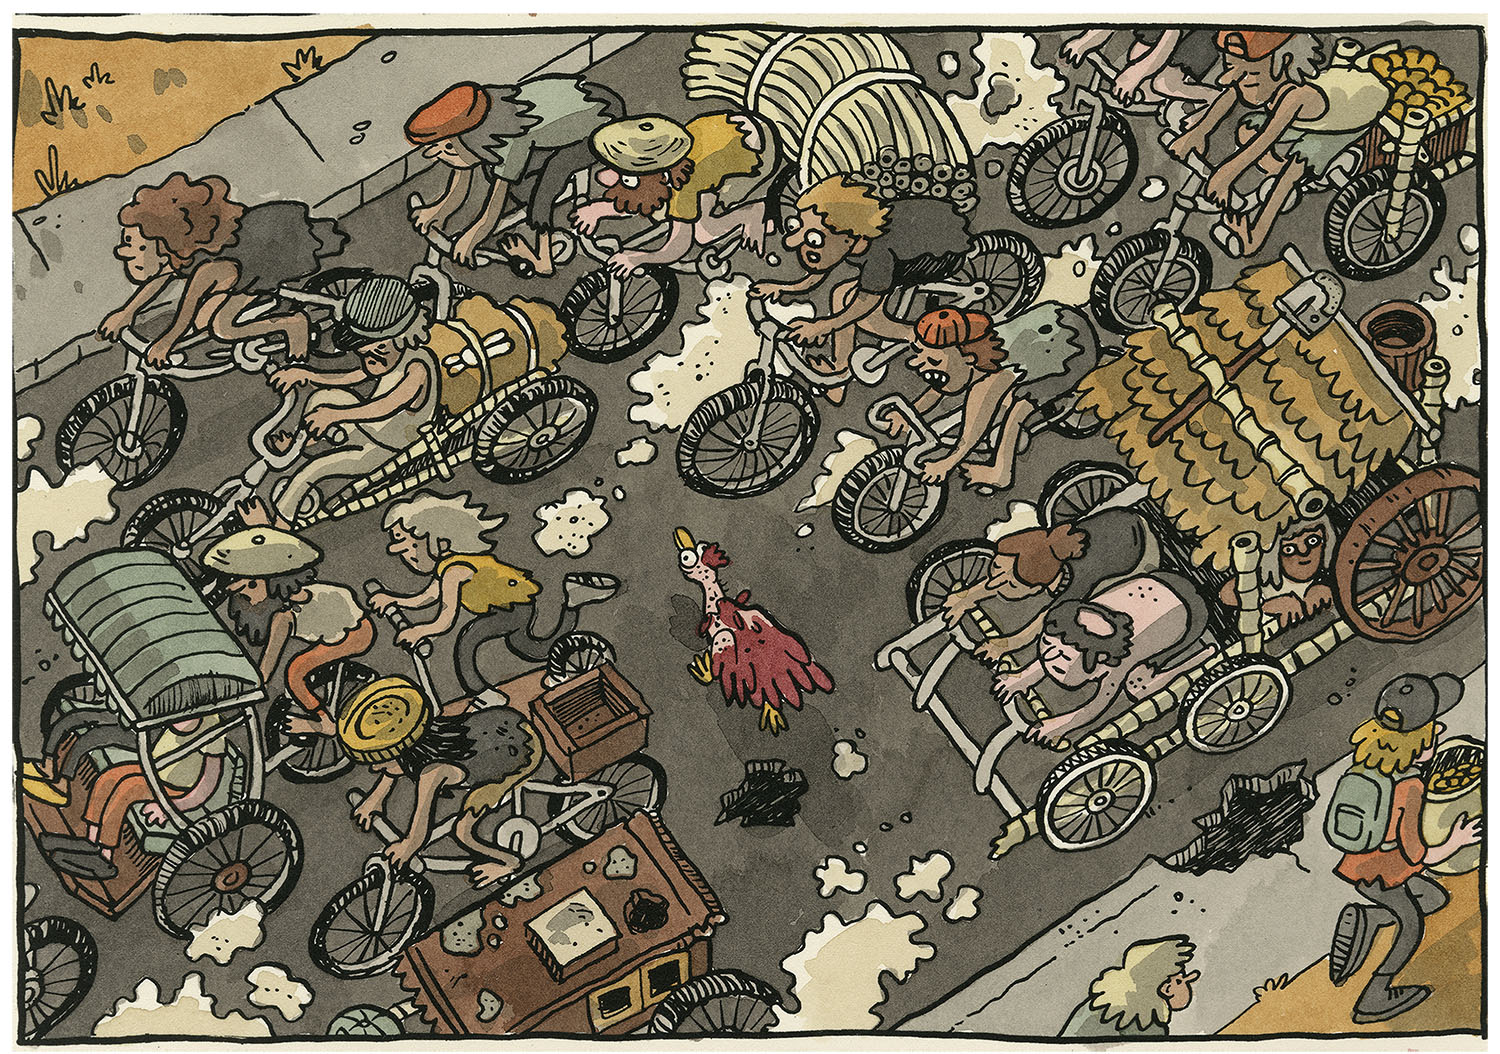 An illustration shows a bird's eye view of a bicycle race, with a chicken running through the crowd